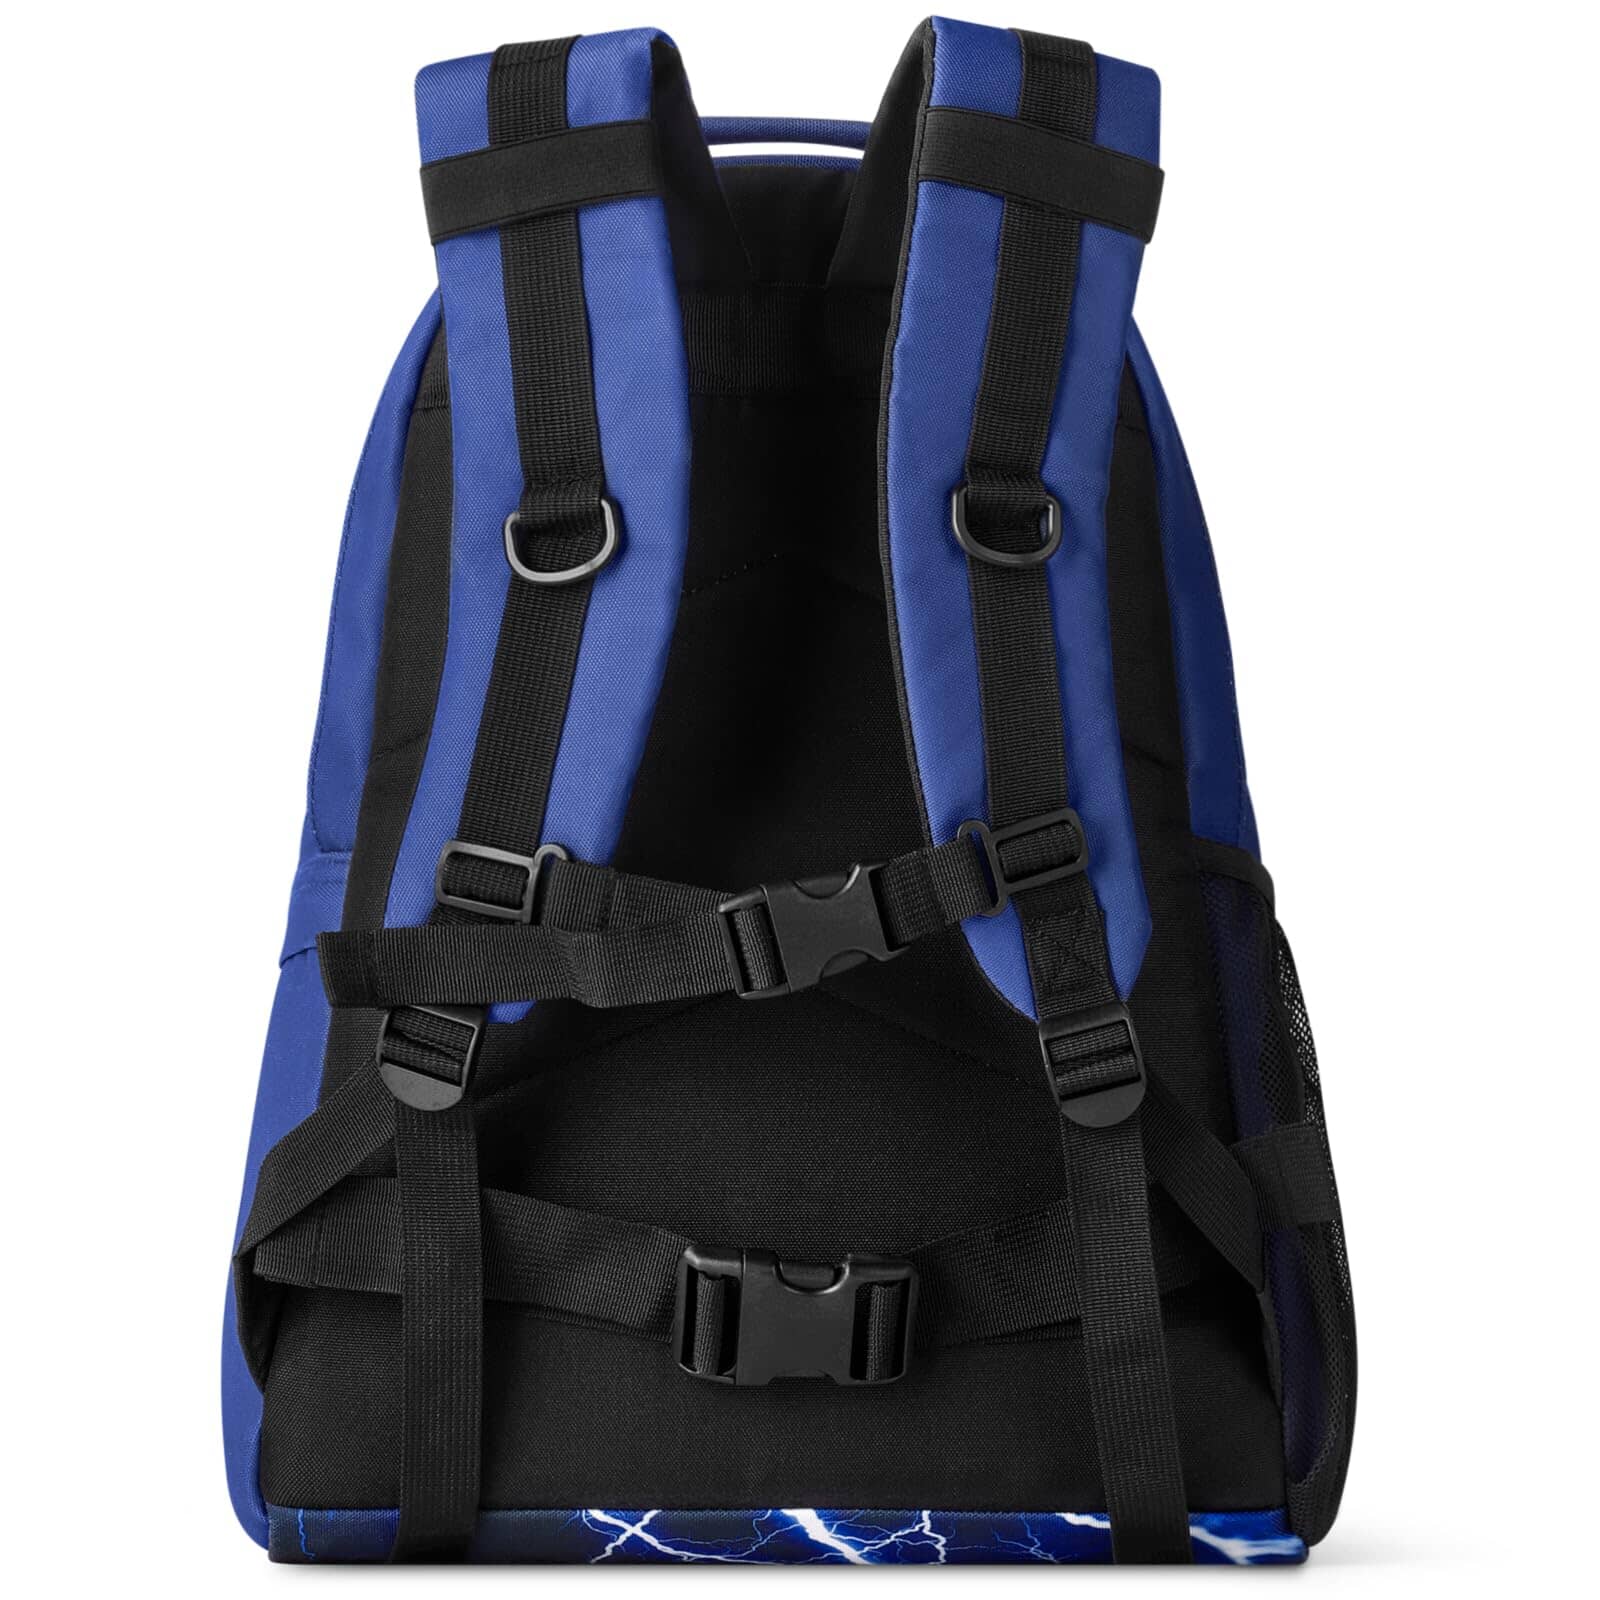 Choco Mocha Boys Backpack for Elementary Middle School, Large Blue Backpack for Kids Teen Boys, 18 Inch chocomochakids 